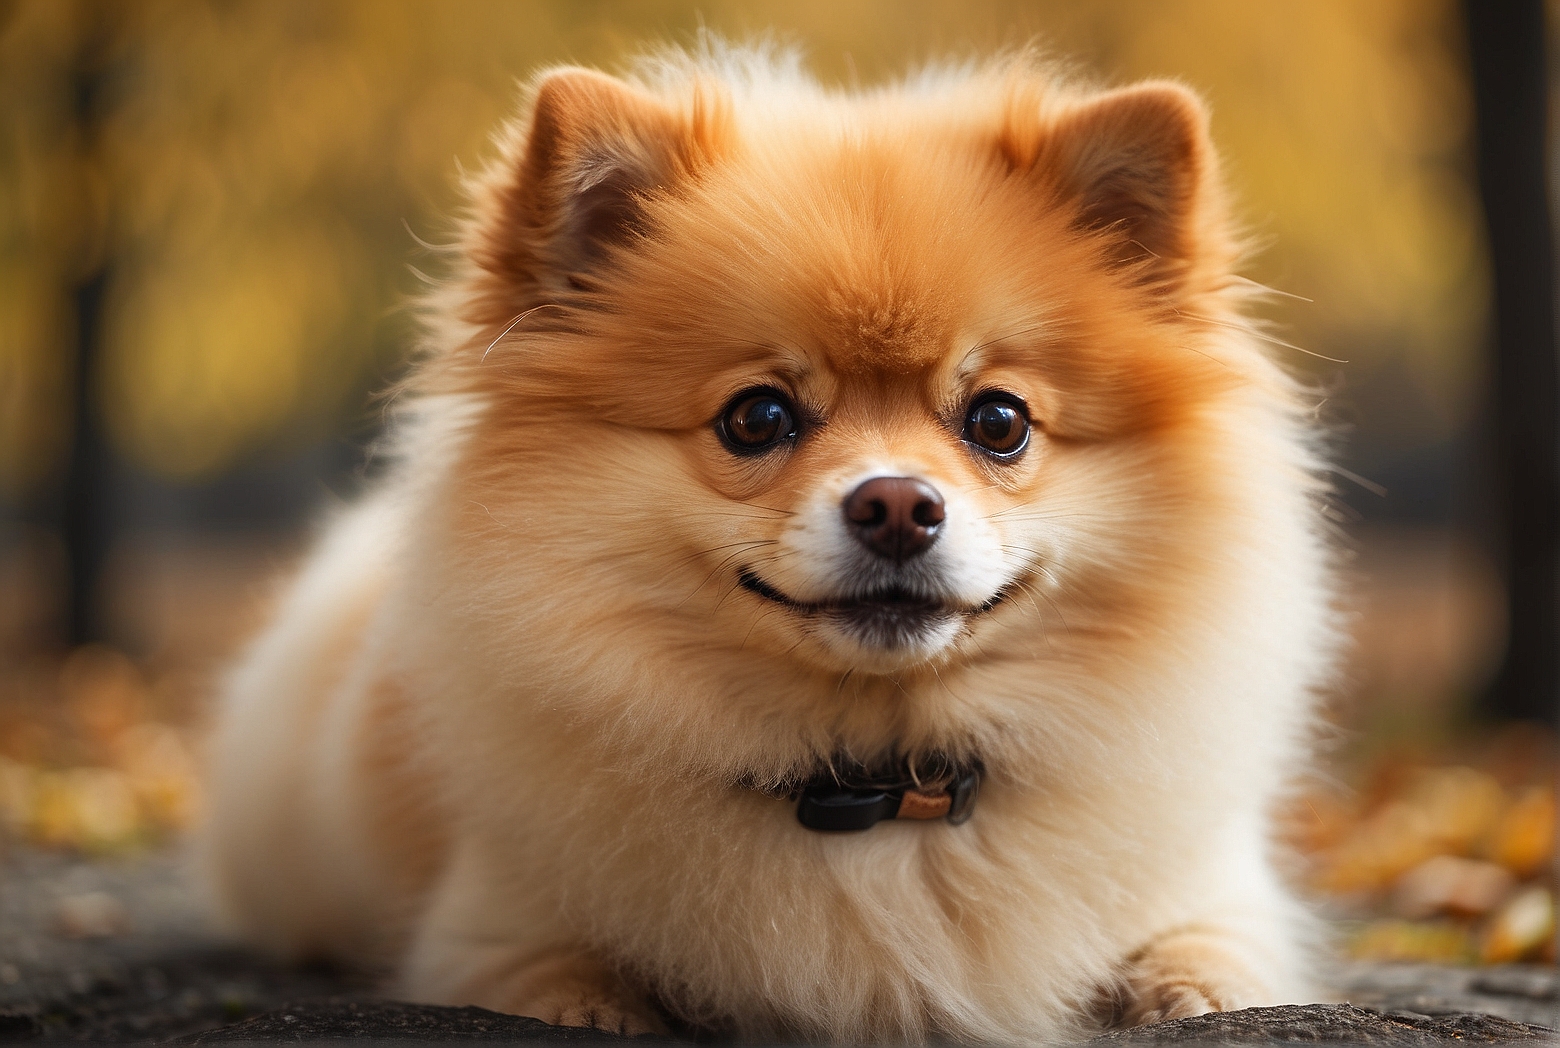 Tips for Training a Pomeranian to be Non-Aggressive